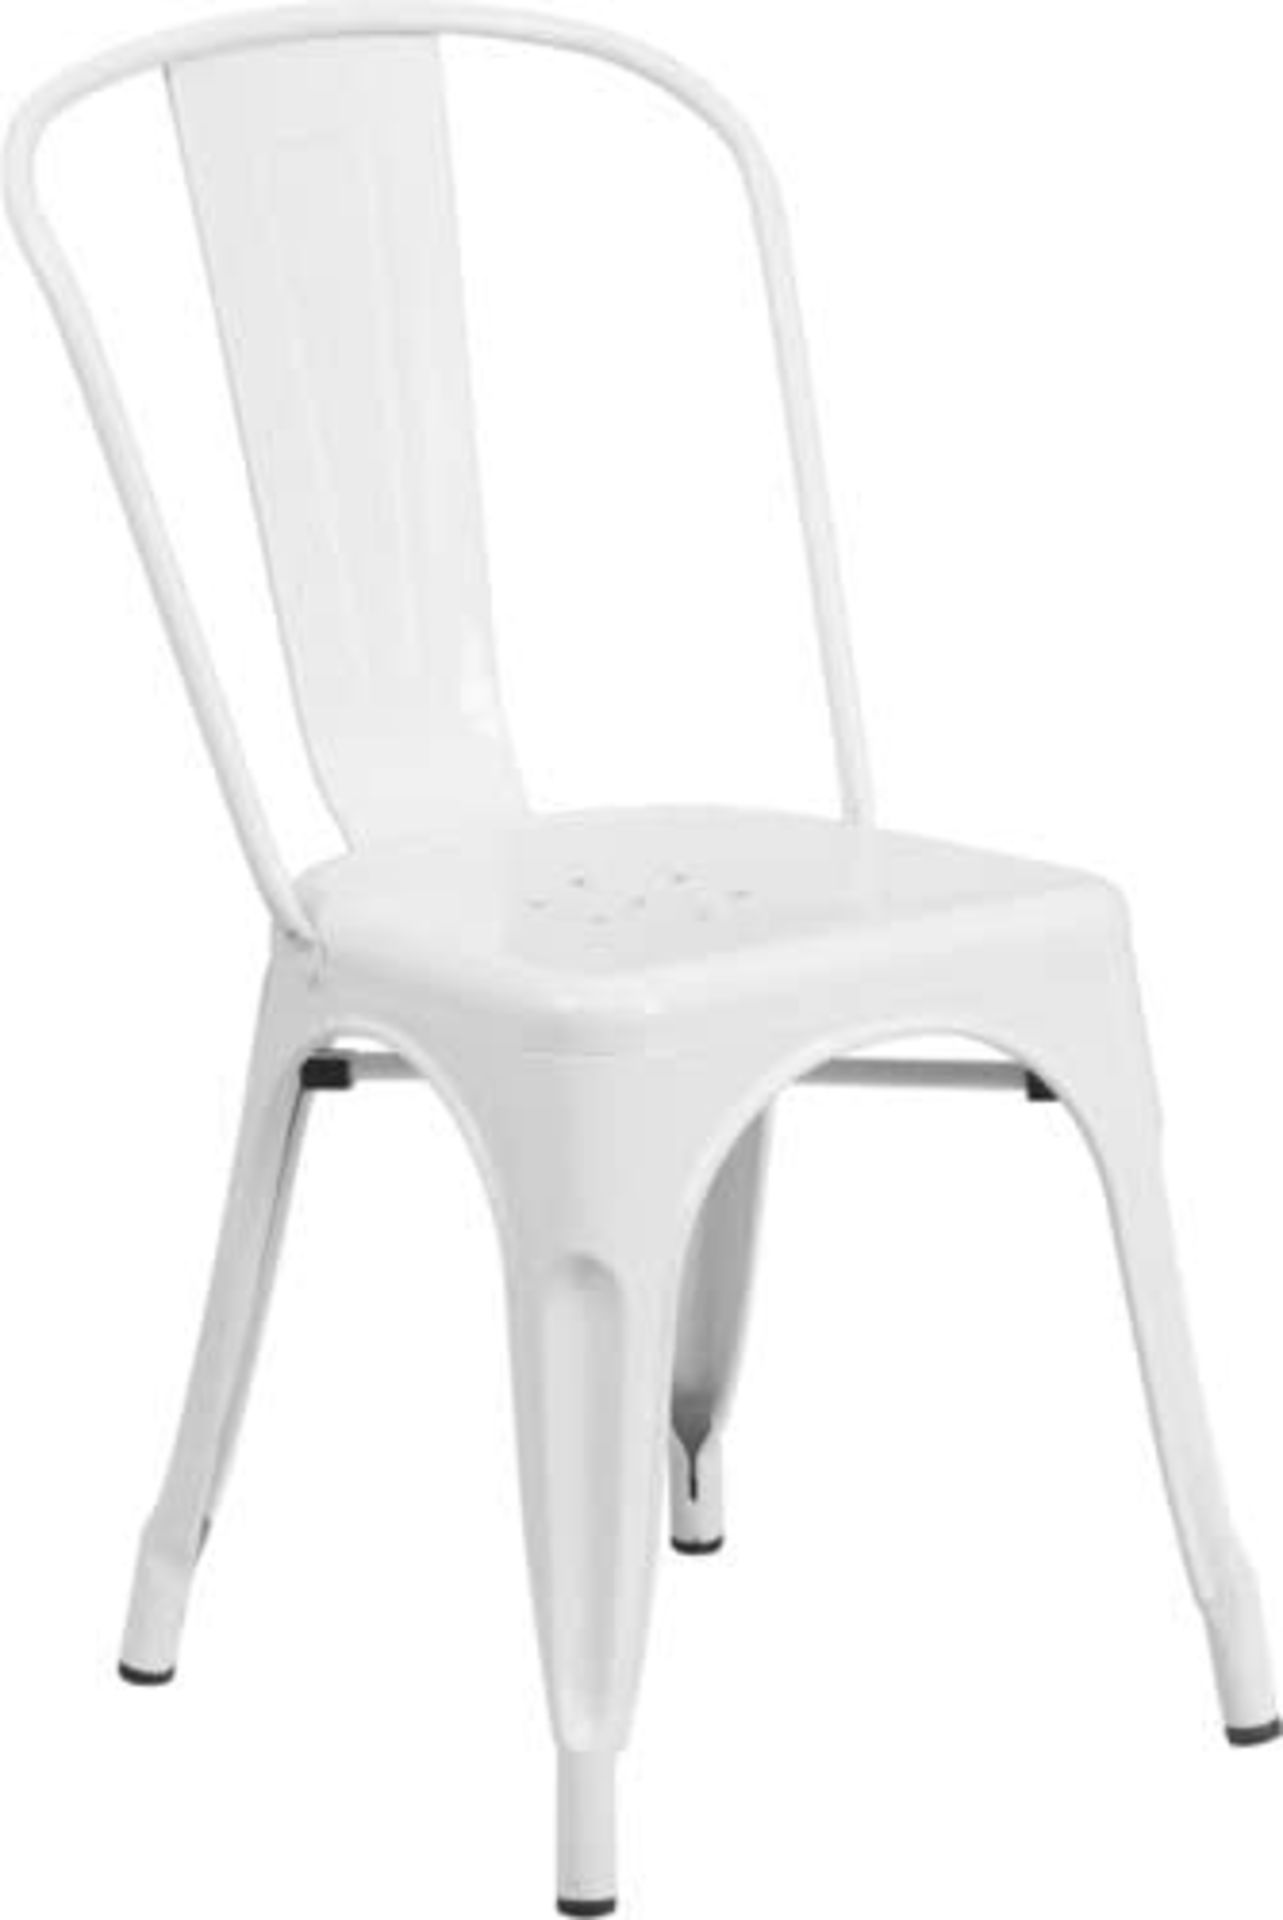 1 x Tolix Industrial Style Outdoor Bistro Table and Chair Set in White- Includes 1 x Table and 4 x - Image 3 of 13